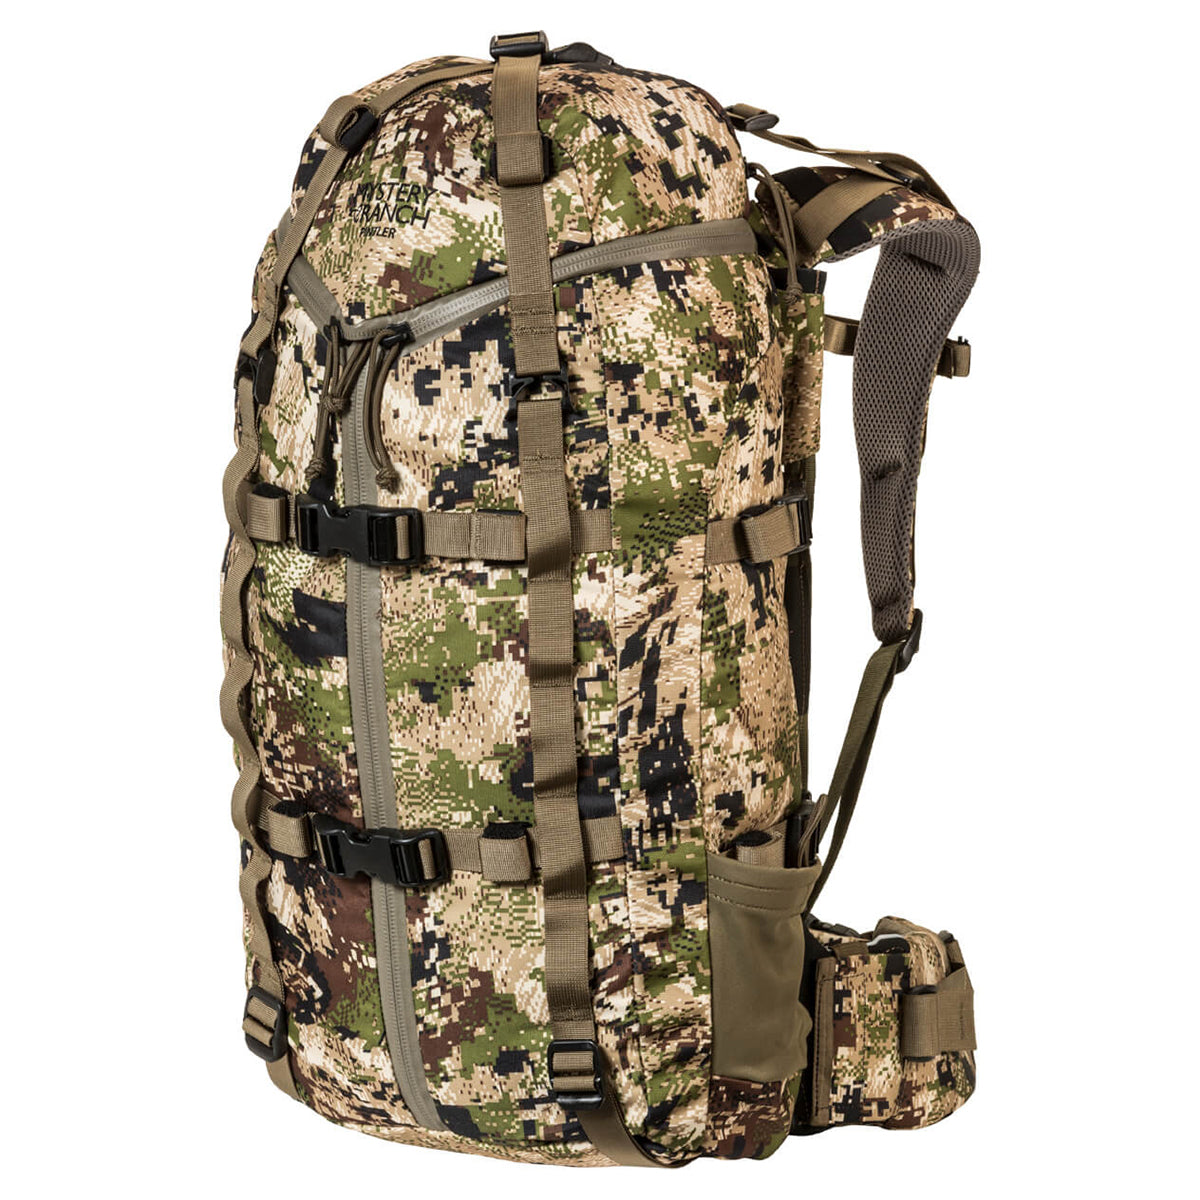 Mystery Ranch Pintler Bag Only (2019) in Mystery Ranch Pintler Bag Only (2019) by Mystery Ranch | Gear - goHUNT Shop by GOHUNT | Mystery Ranch - GOHUNT Shop